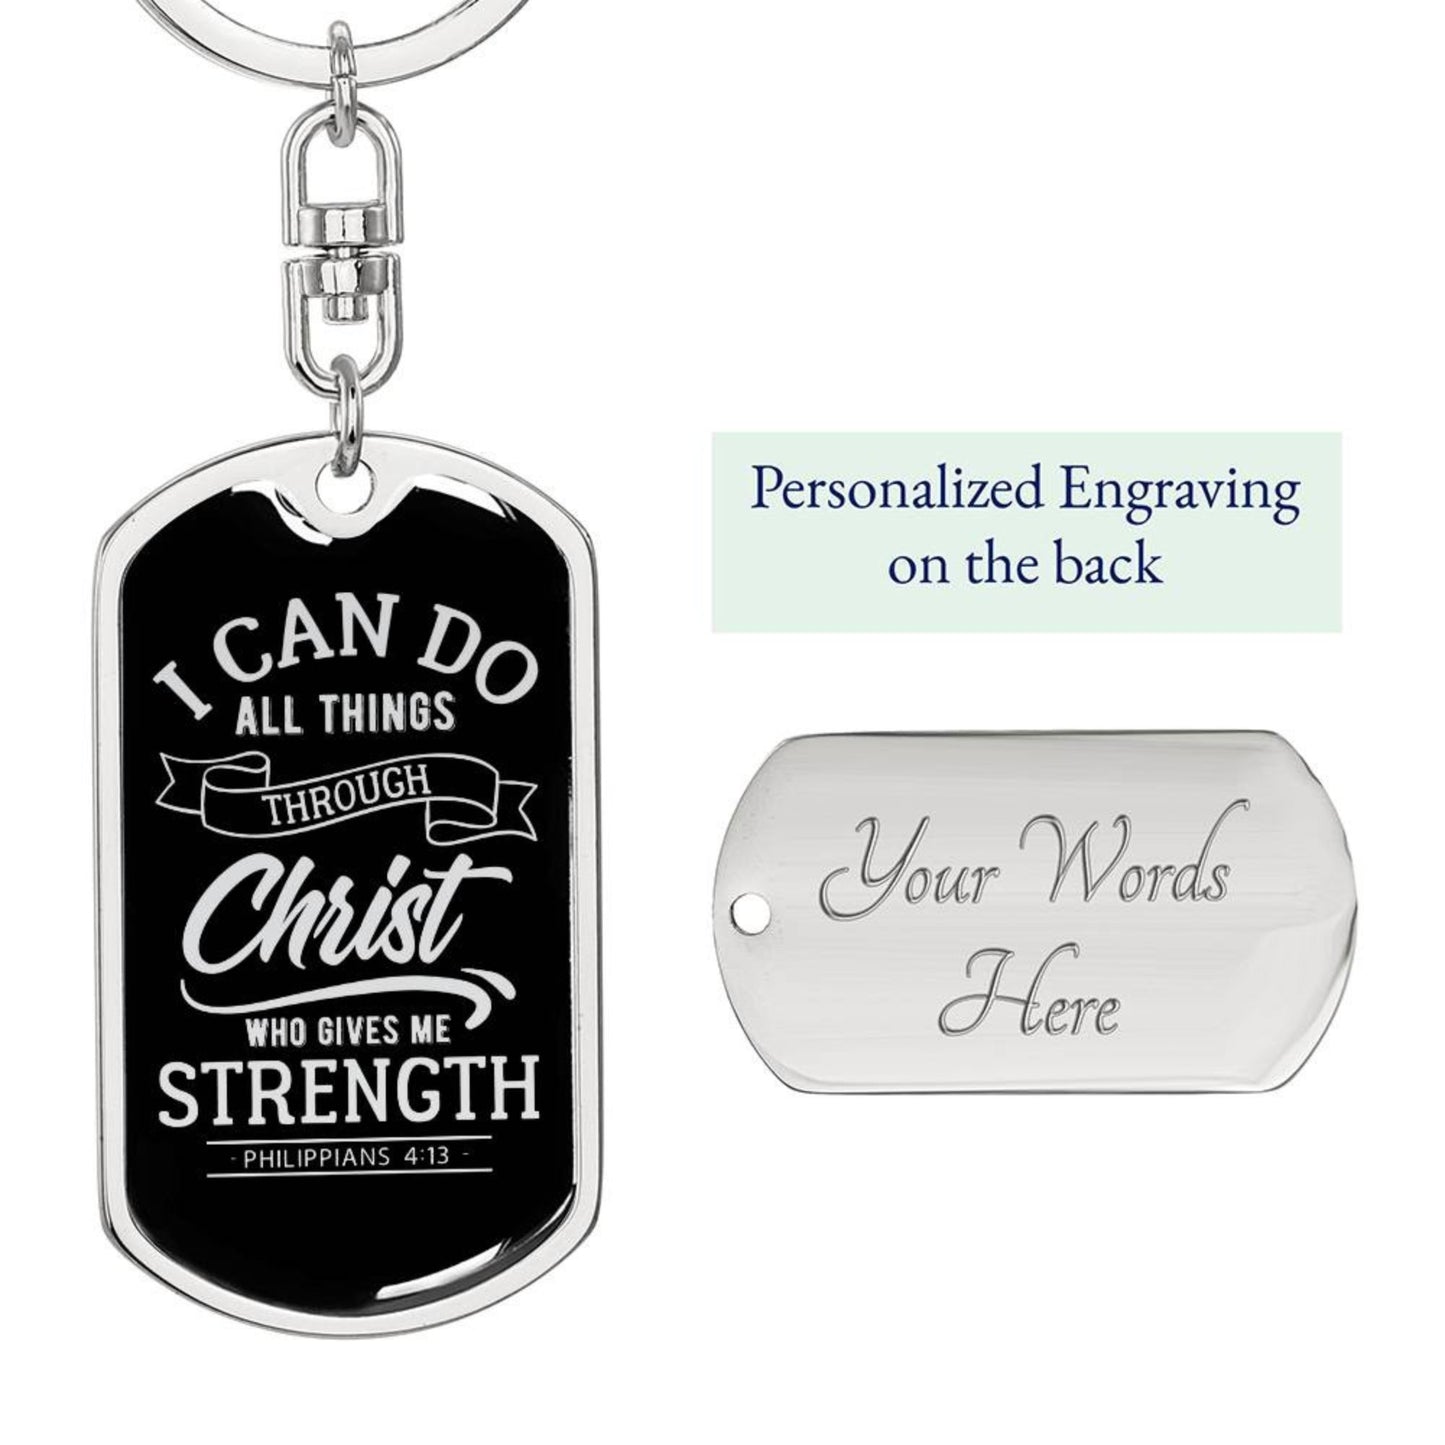 I Can Do All Things Through Christ - Silver Dog Tag with Swivel Keychain Engraving: Yes Jesus Passion Apparel